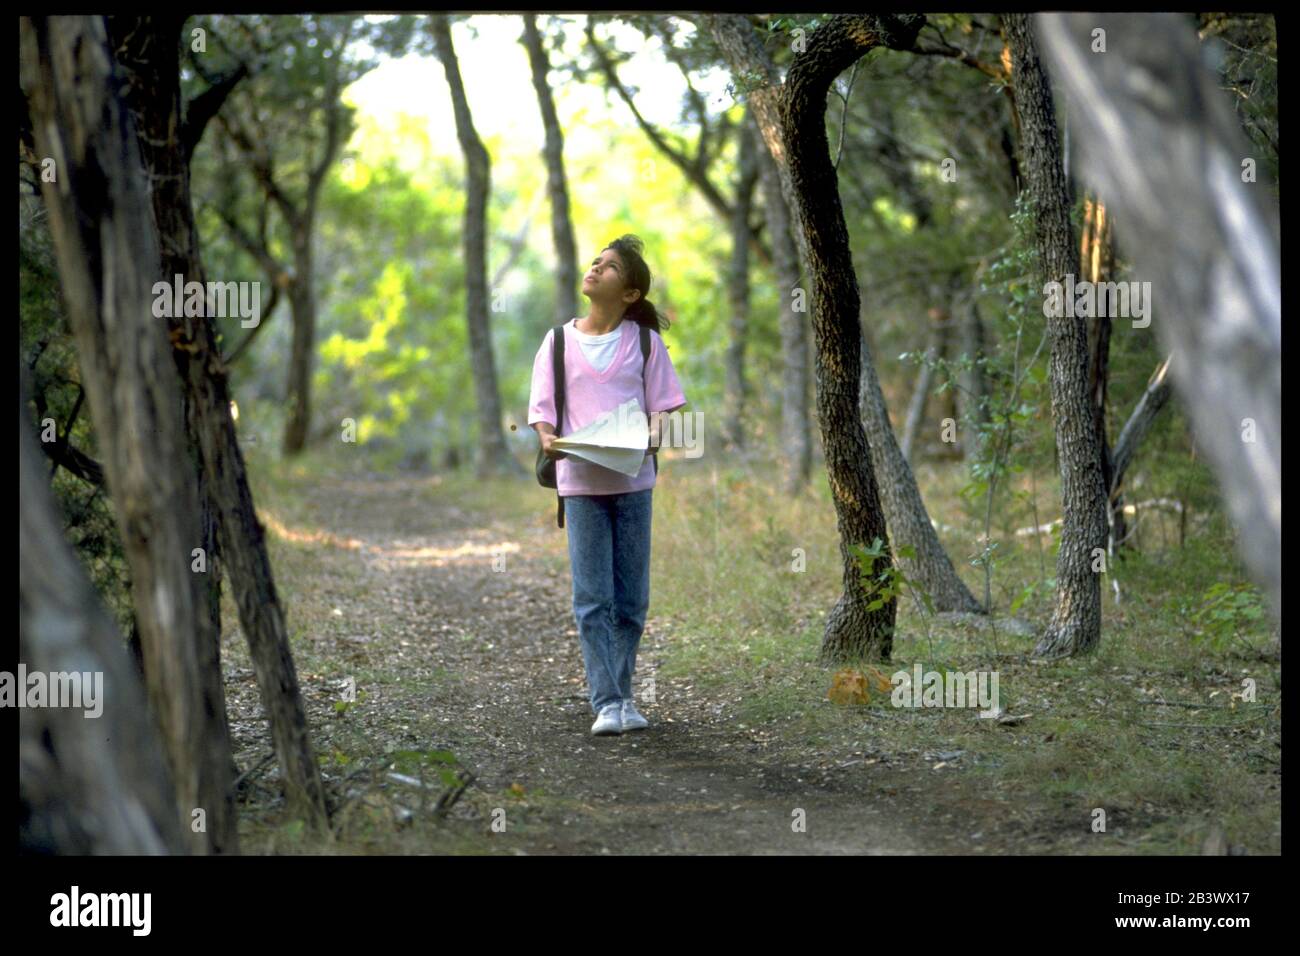 Austin Texas USA: 12-year-old Hispanic girl using map while walking on path in wooded park.  ©Bob Daemmrich Stock Photo